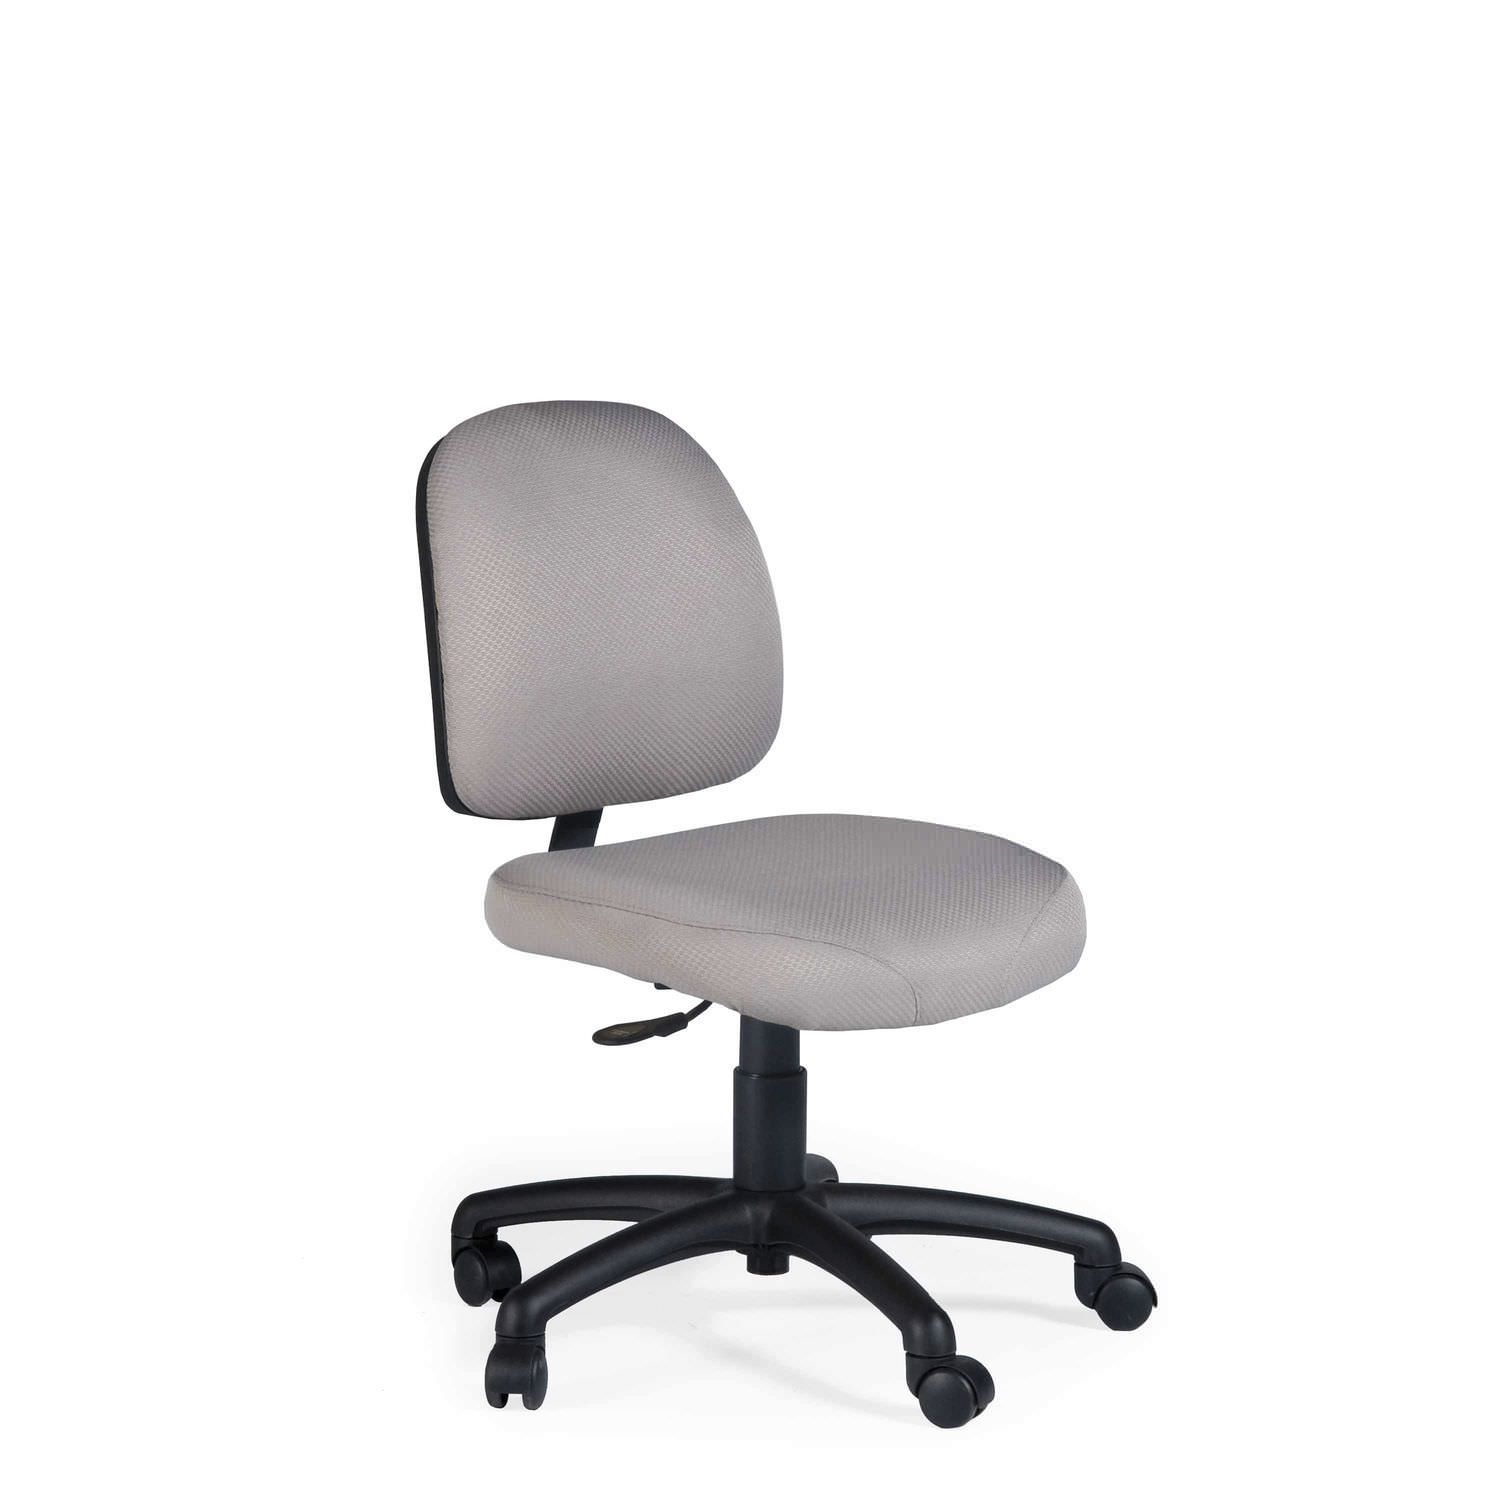 Office chair / on casters / rotating / height-adjustable Series 100 La-Z-Boy Contract Furniture